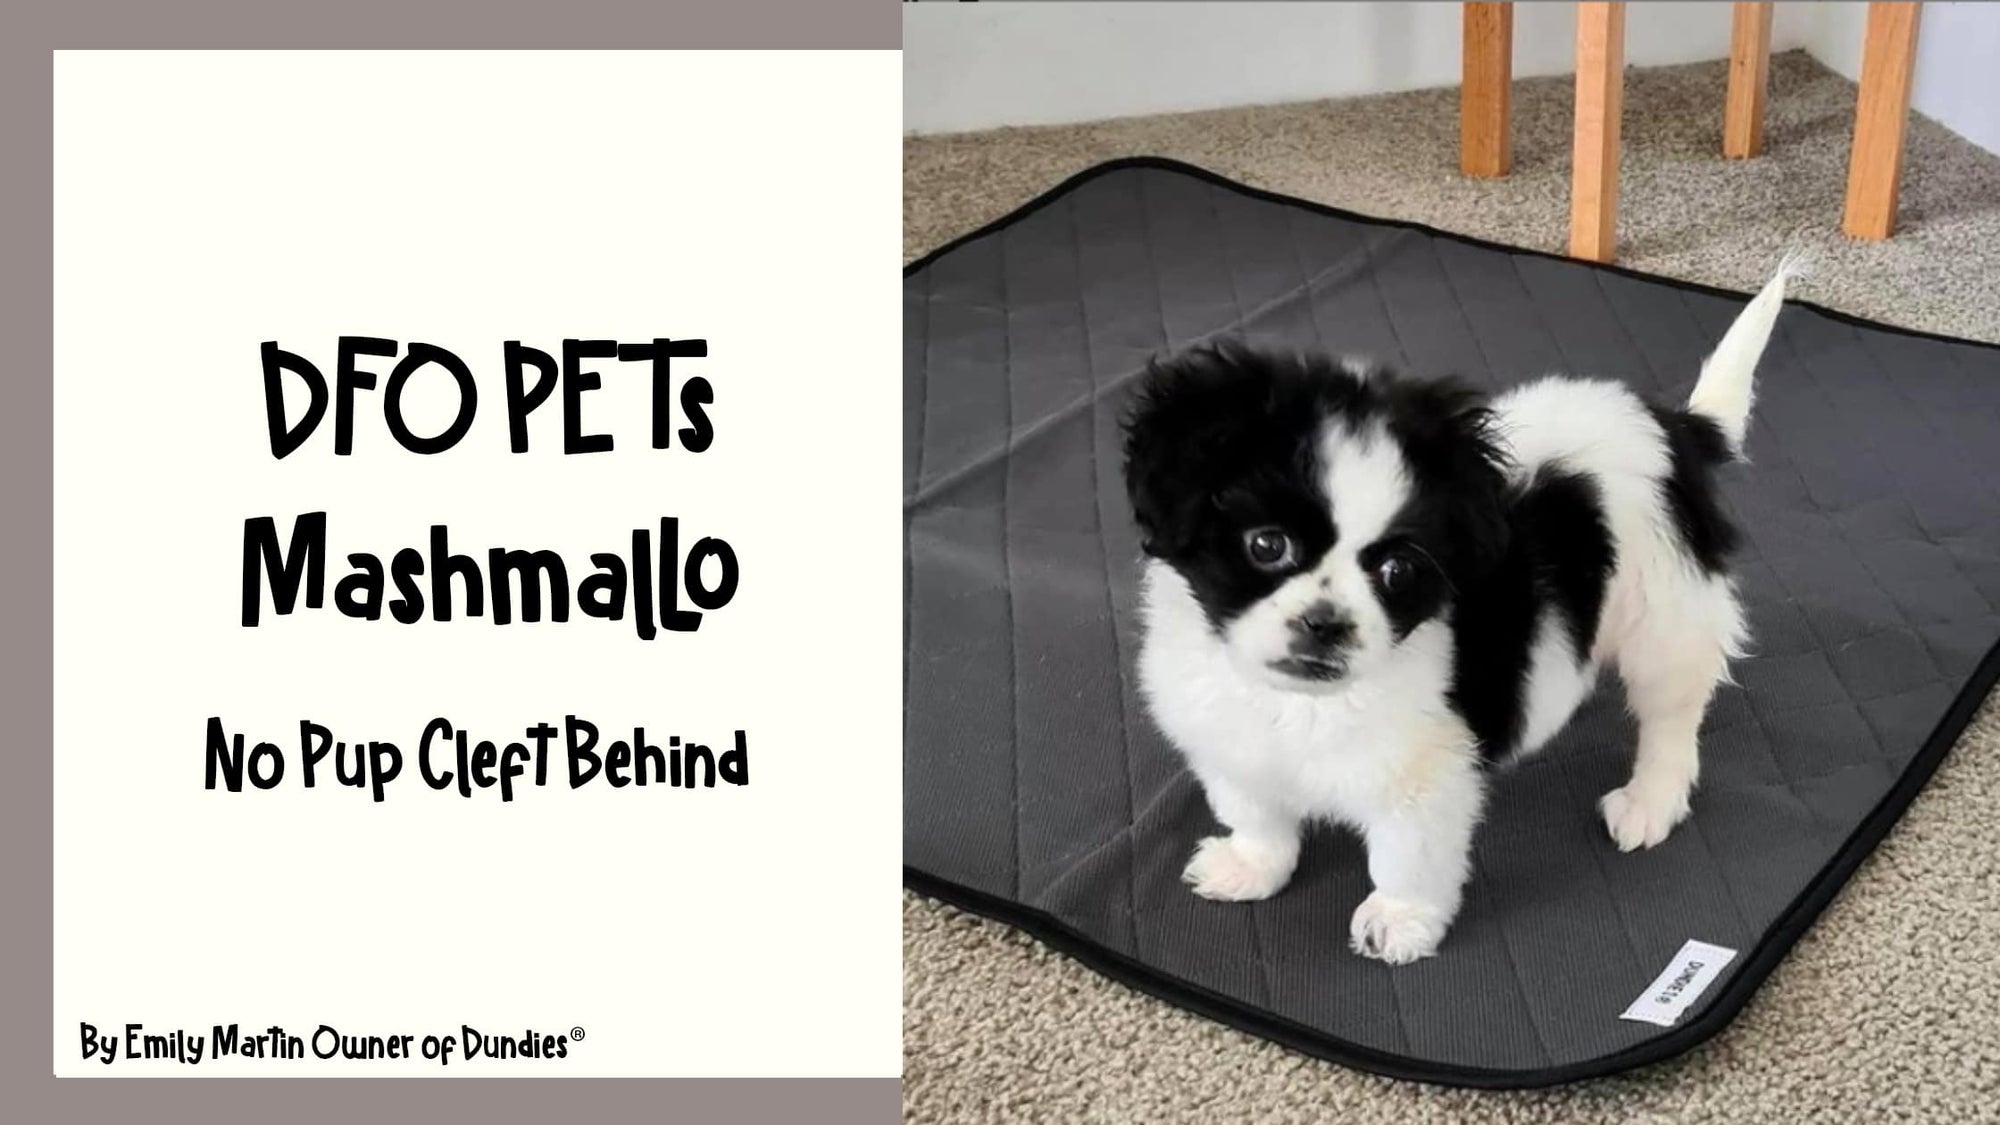 Direct Factory Outlet Pets - Marshmallow from No Pup Cleft Behind